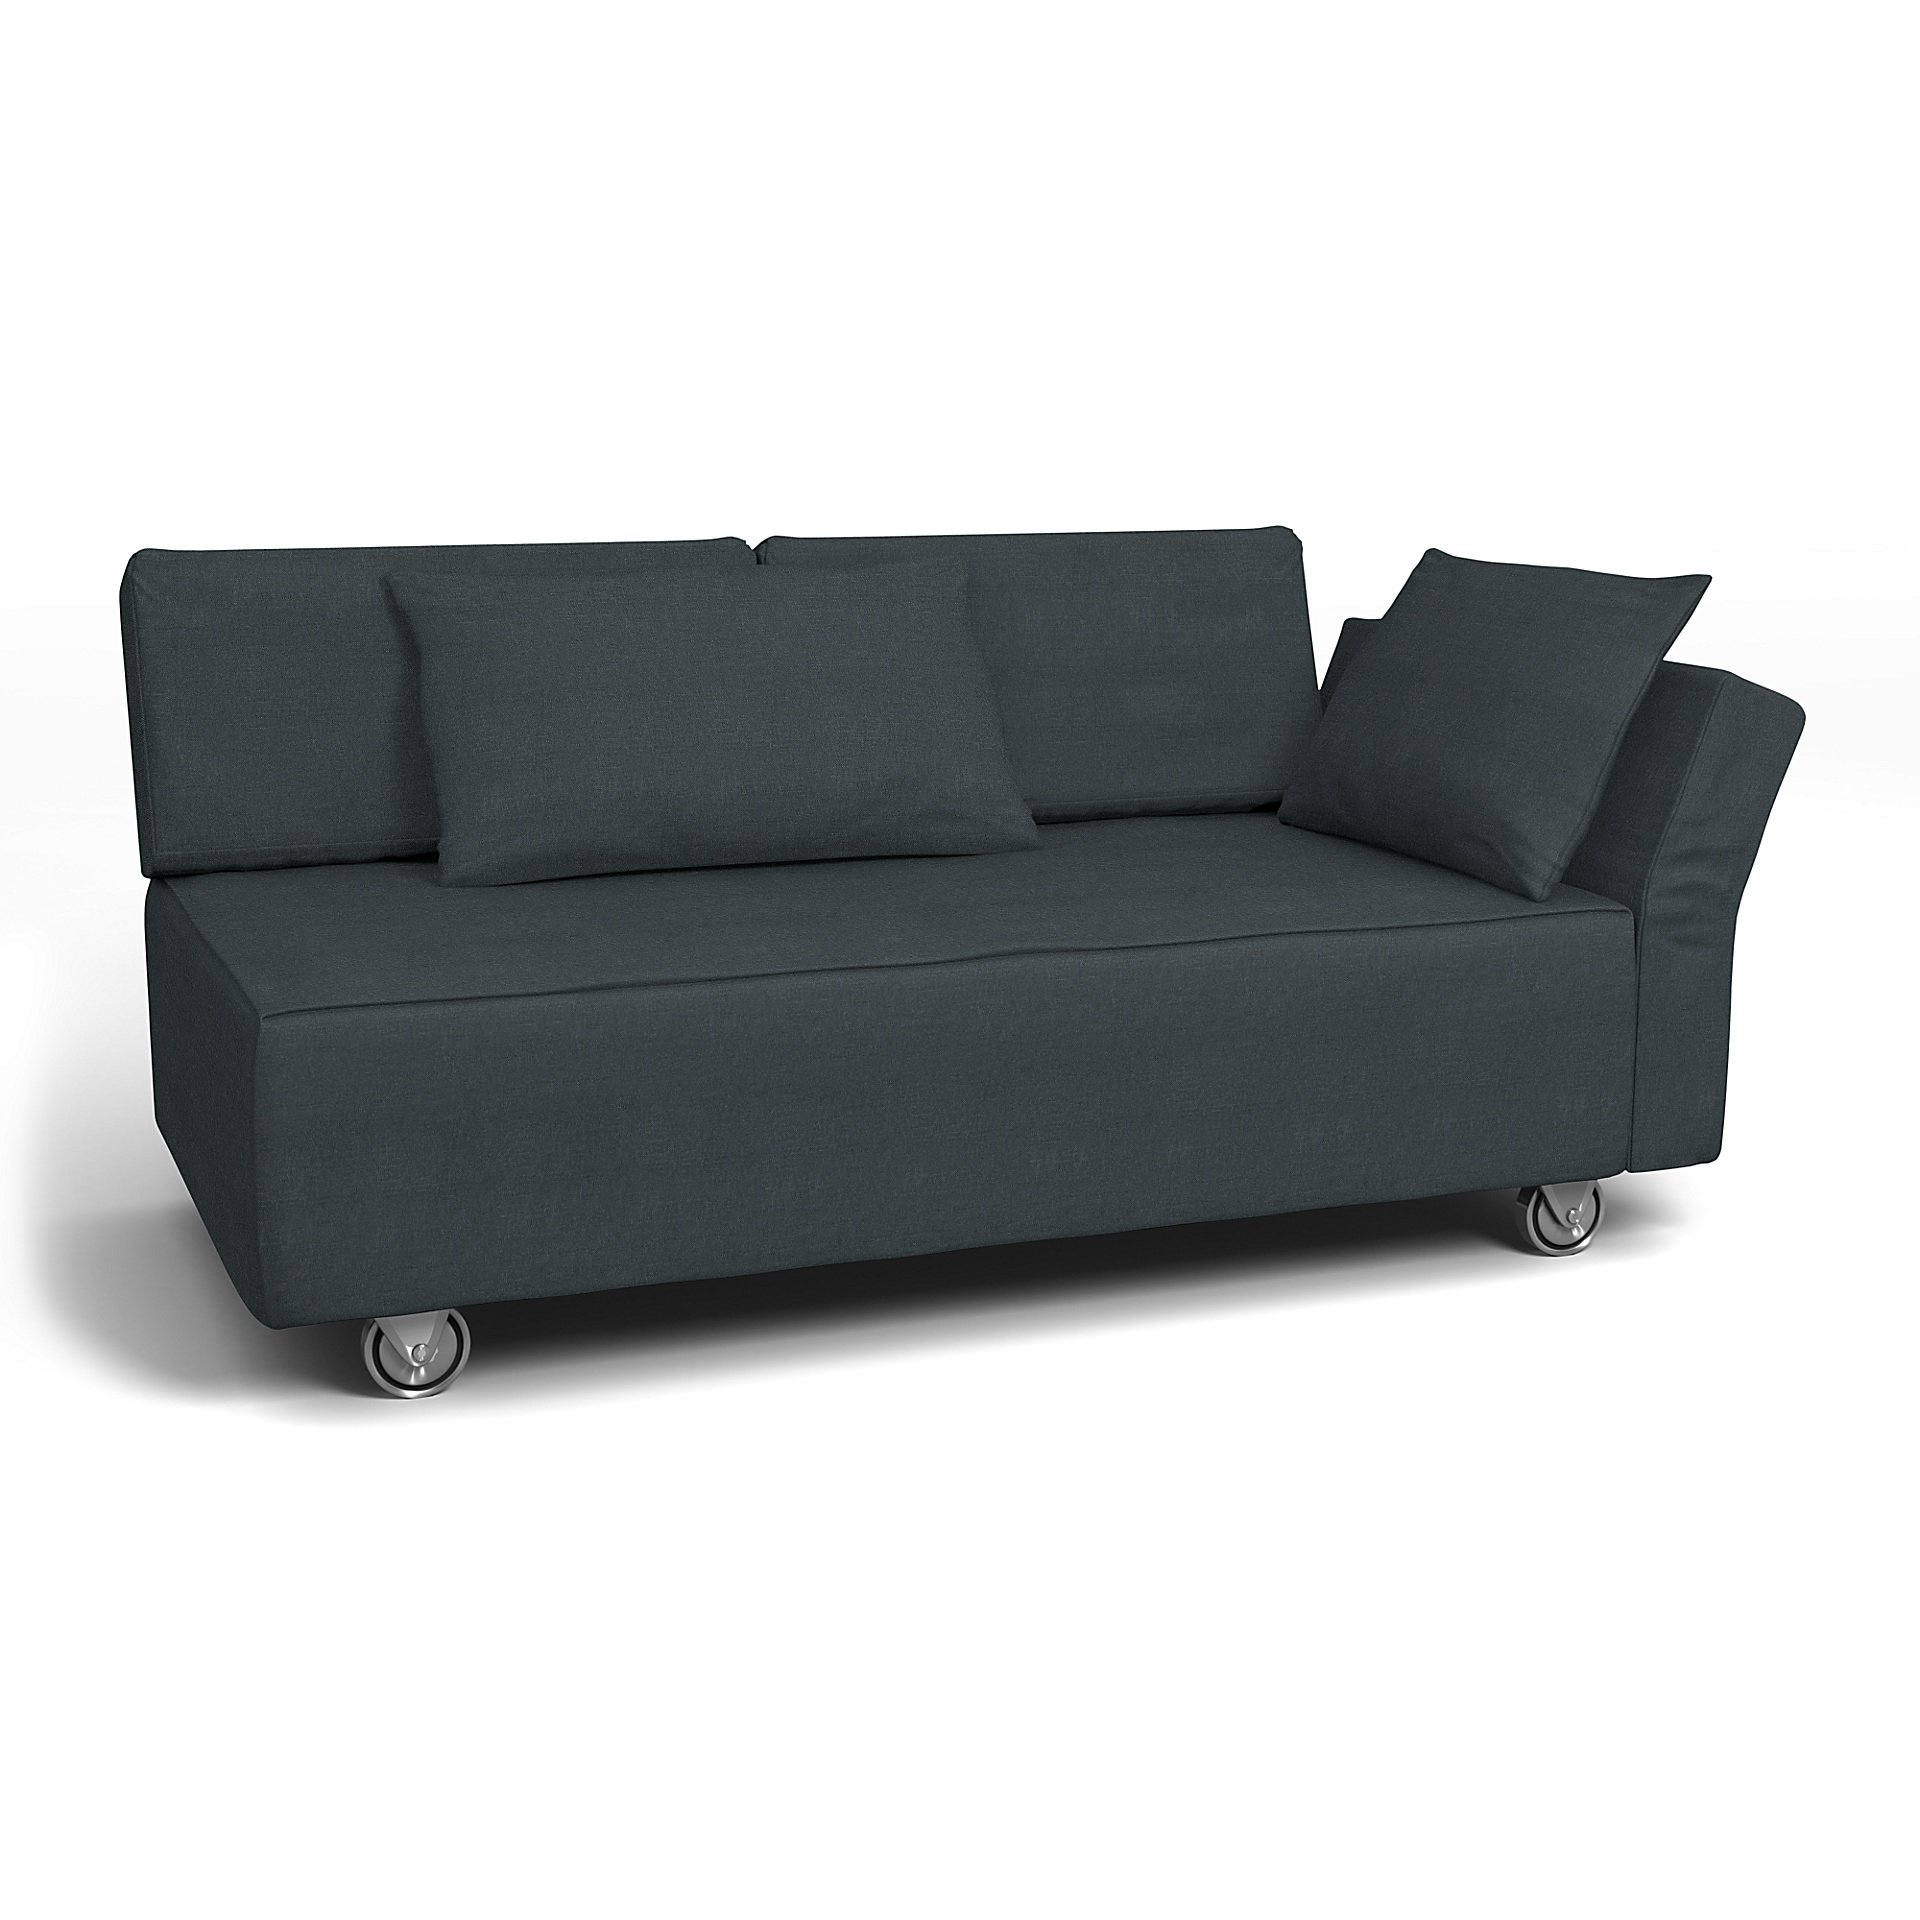 IKEA - Falsterbo 2 Seat Sofa with Right Arm Cover, Graphite Grey, Linen - Bemz